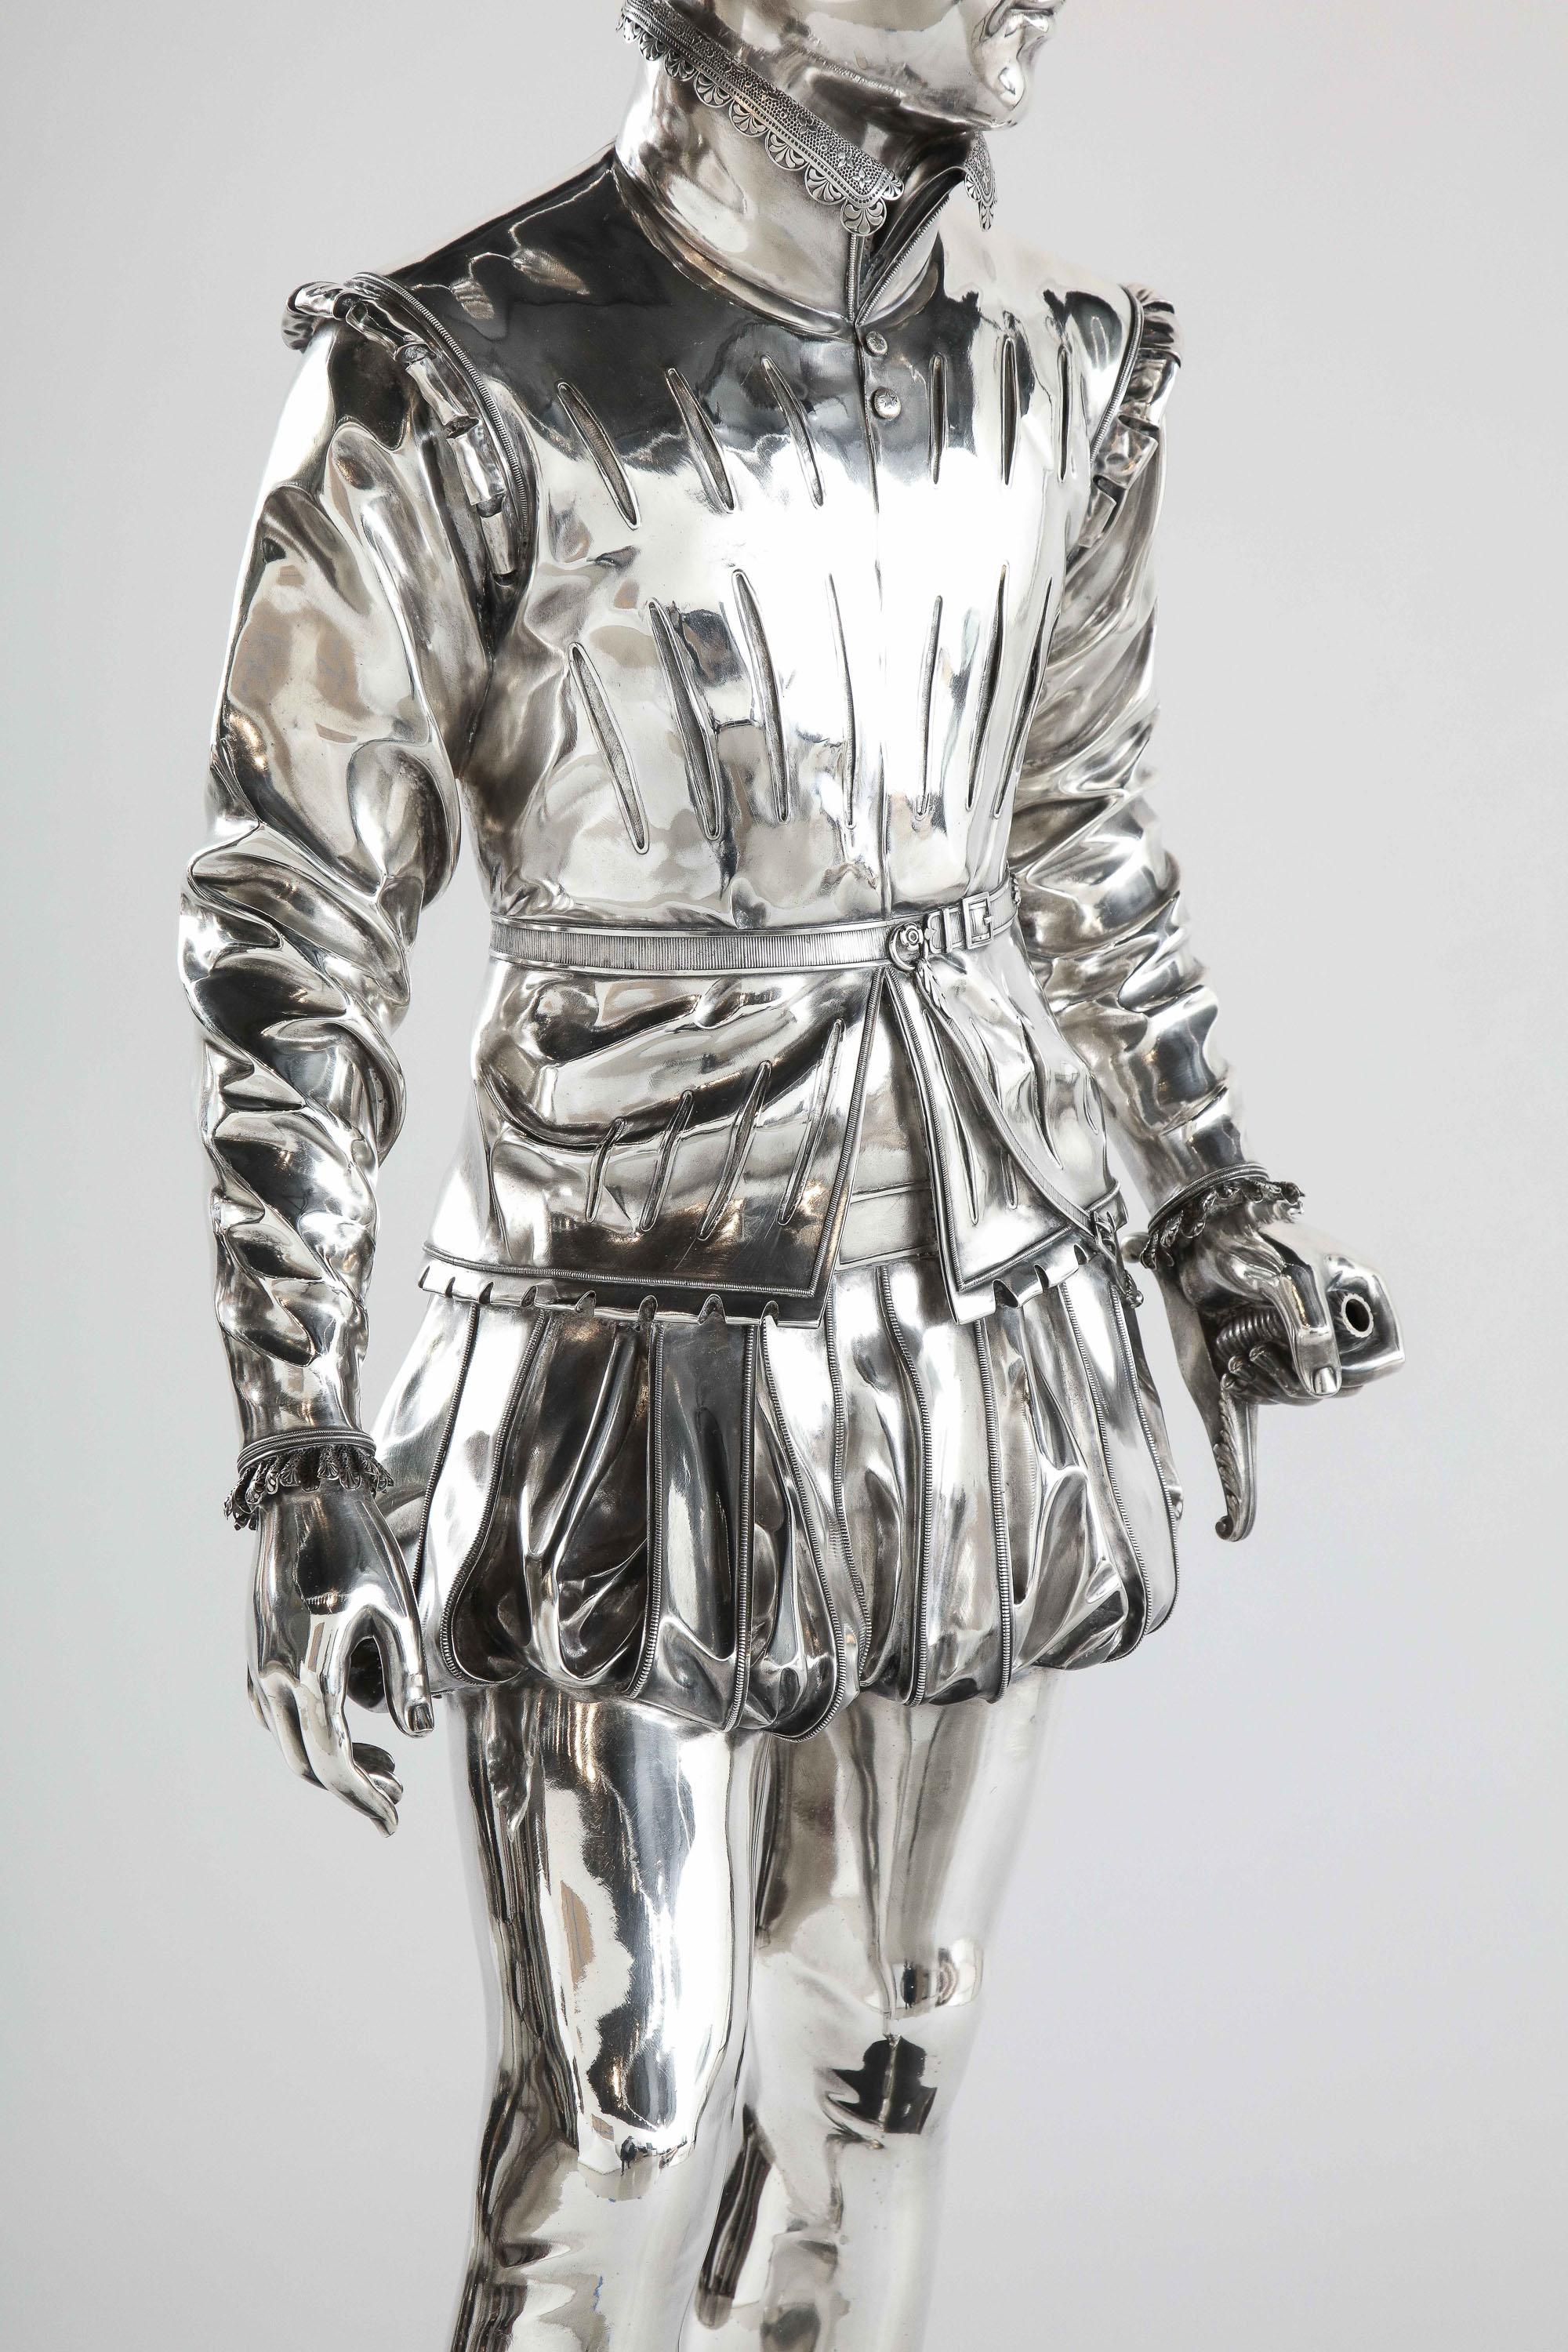 F. Barbedienne, a Life-Size Silvered Bronze of King Henri IV Enfant as a Child 13